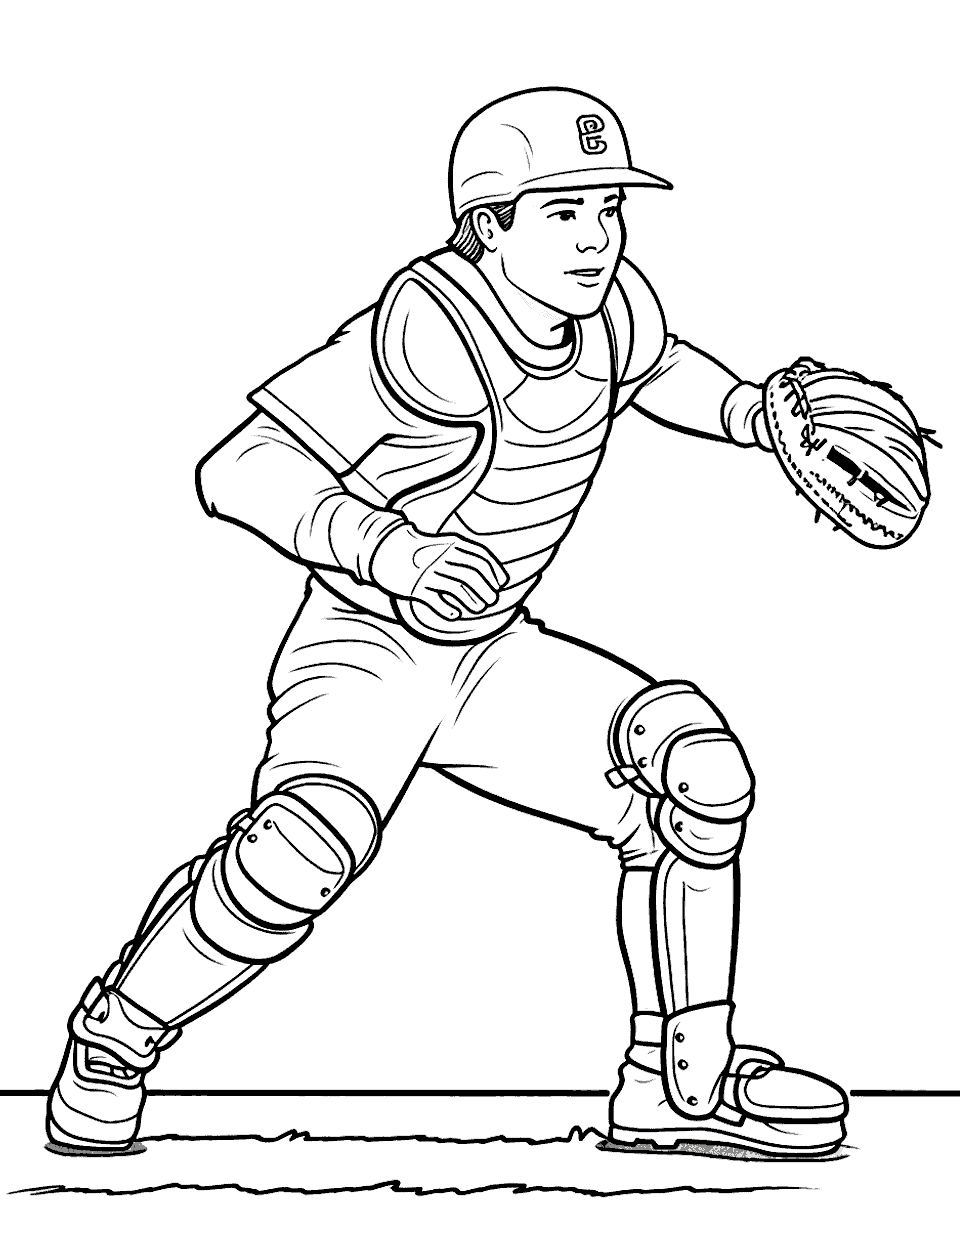 Cool Catcher in Action Baseball Coloring Page - An MLB catcher behind home plate, mitt outstretched, ready to catch a speeding pitch.